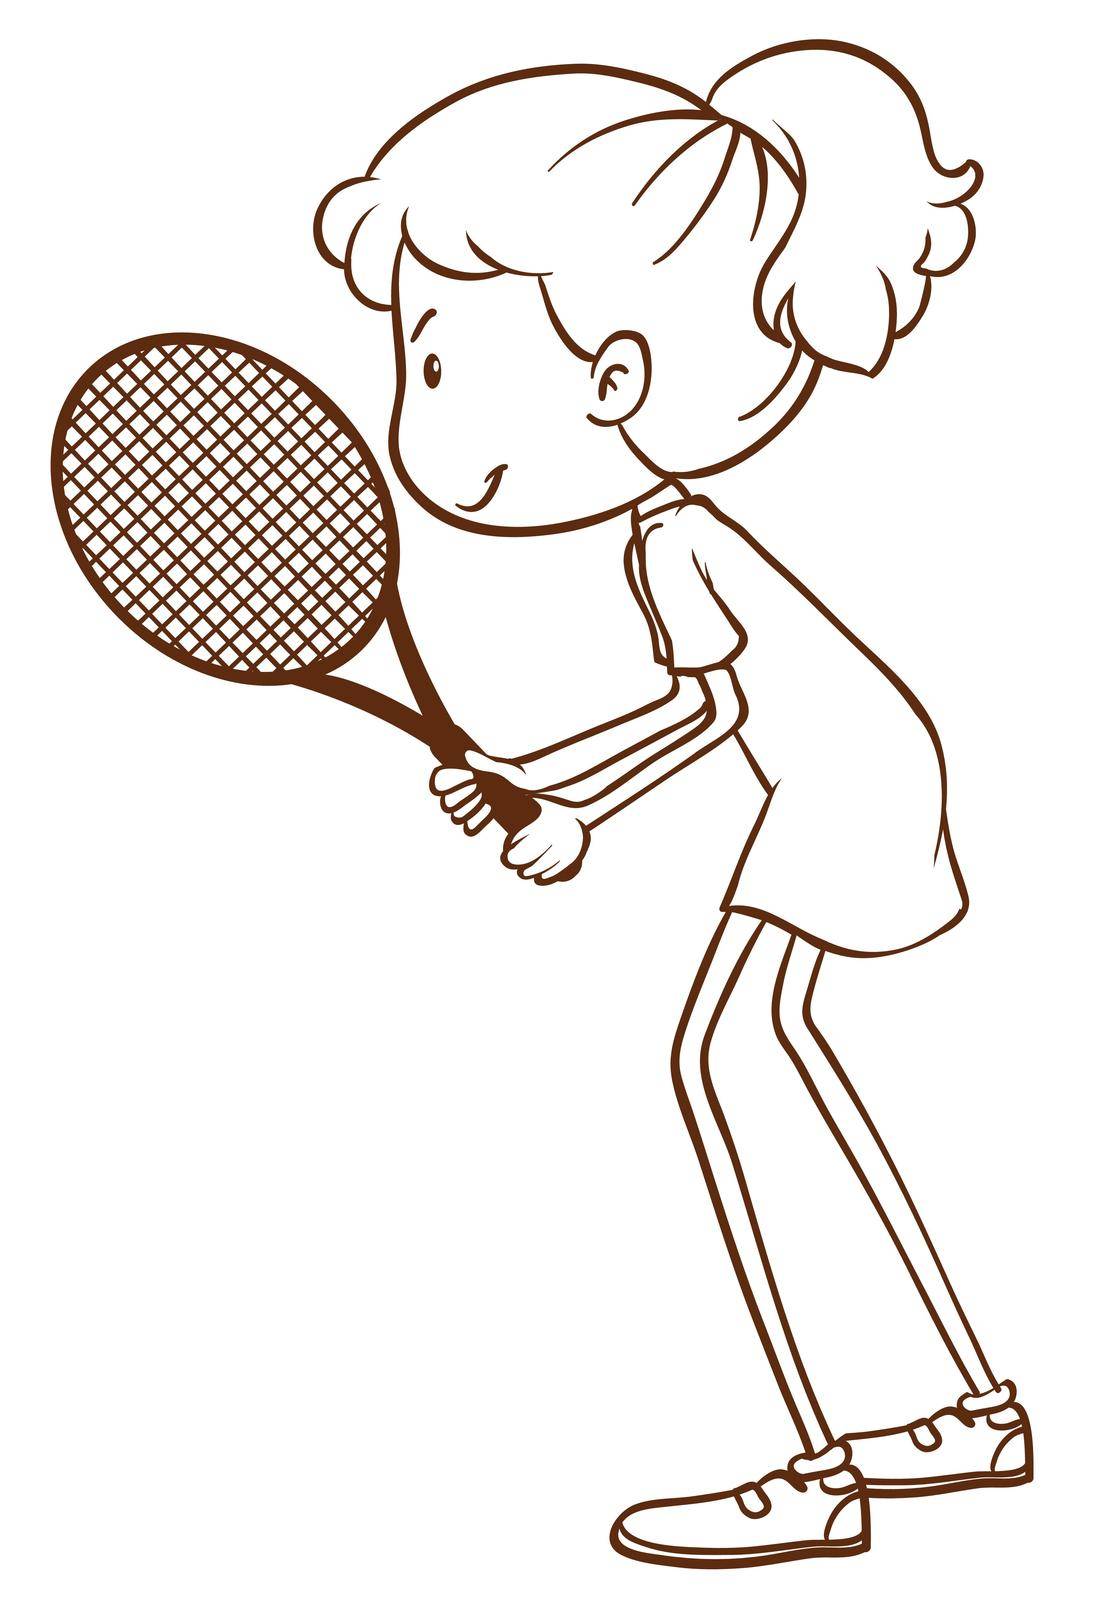 A plain drawing of a tennis player on a white background